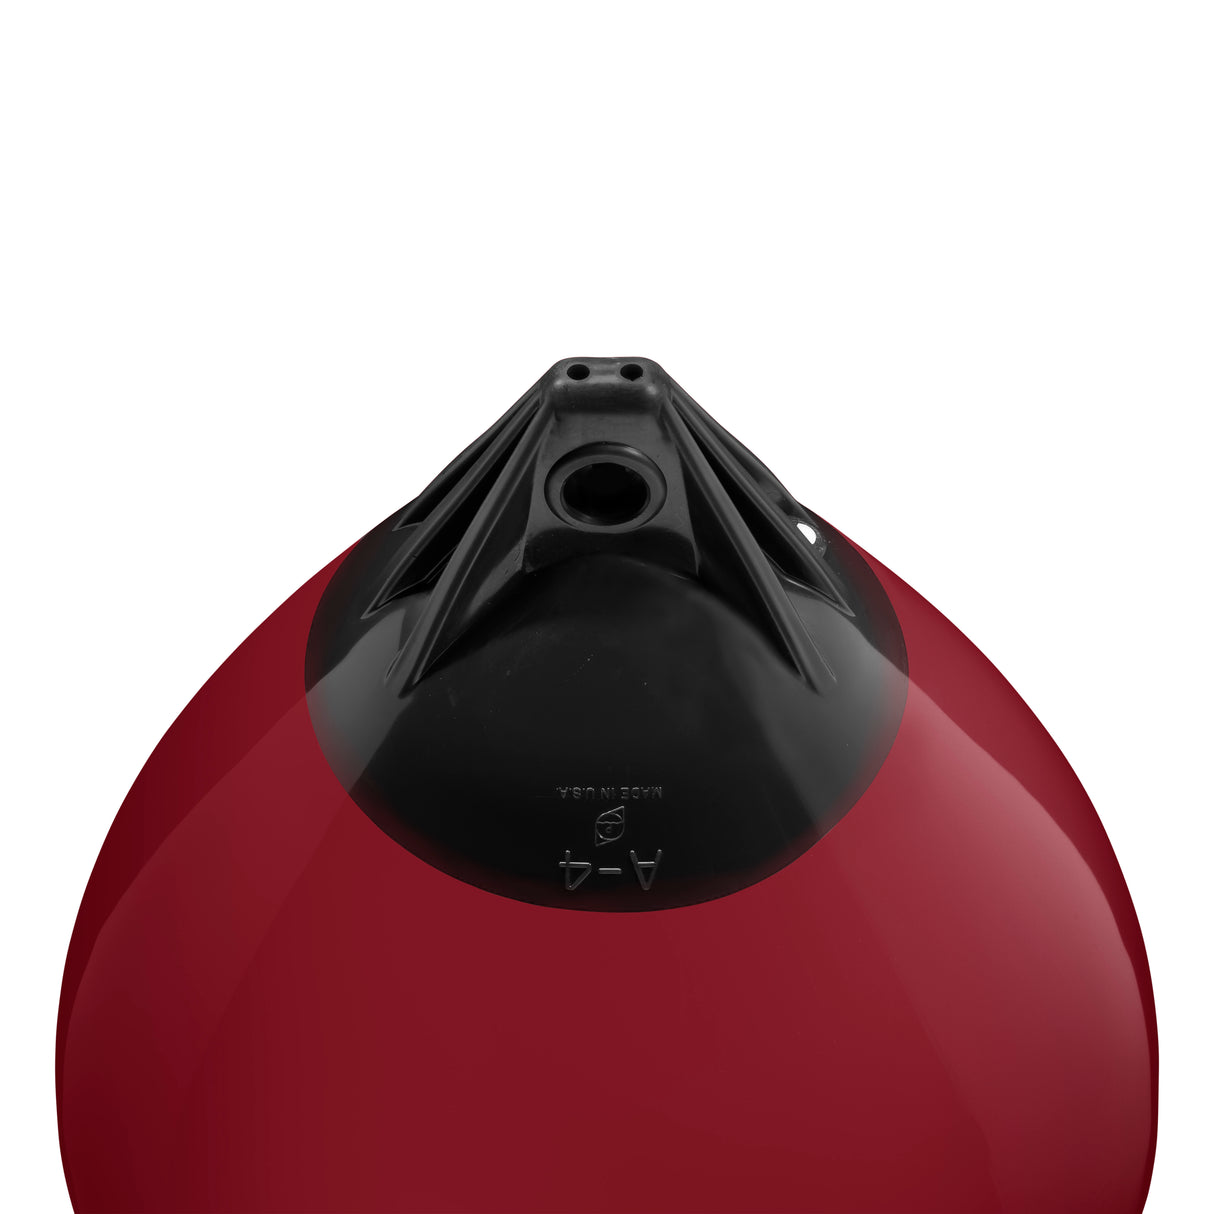 Burgundy buoy with Black-Top, Polyform A-4 angled shot